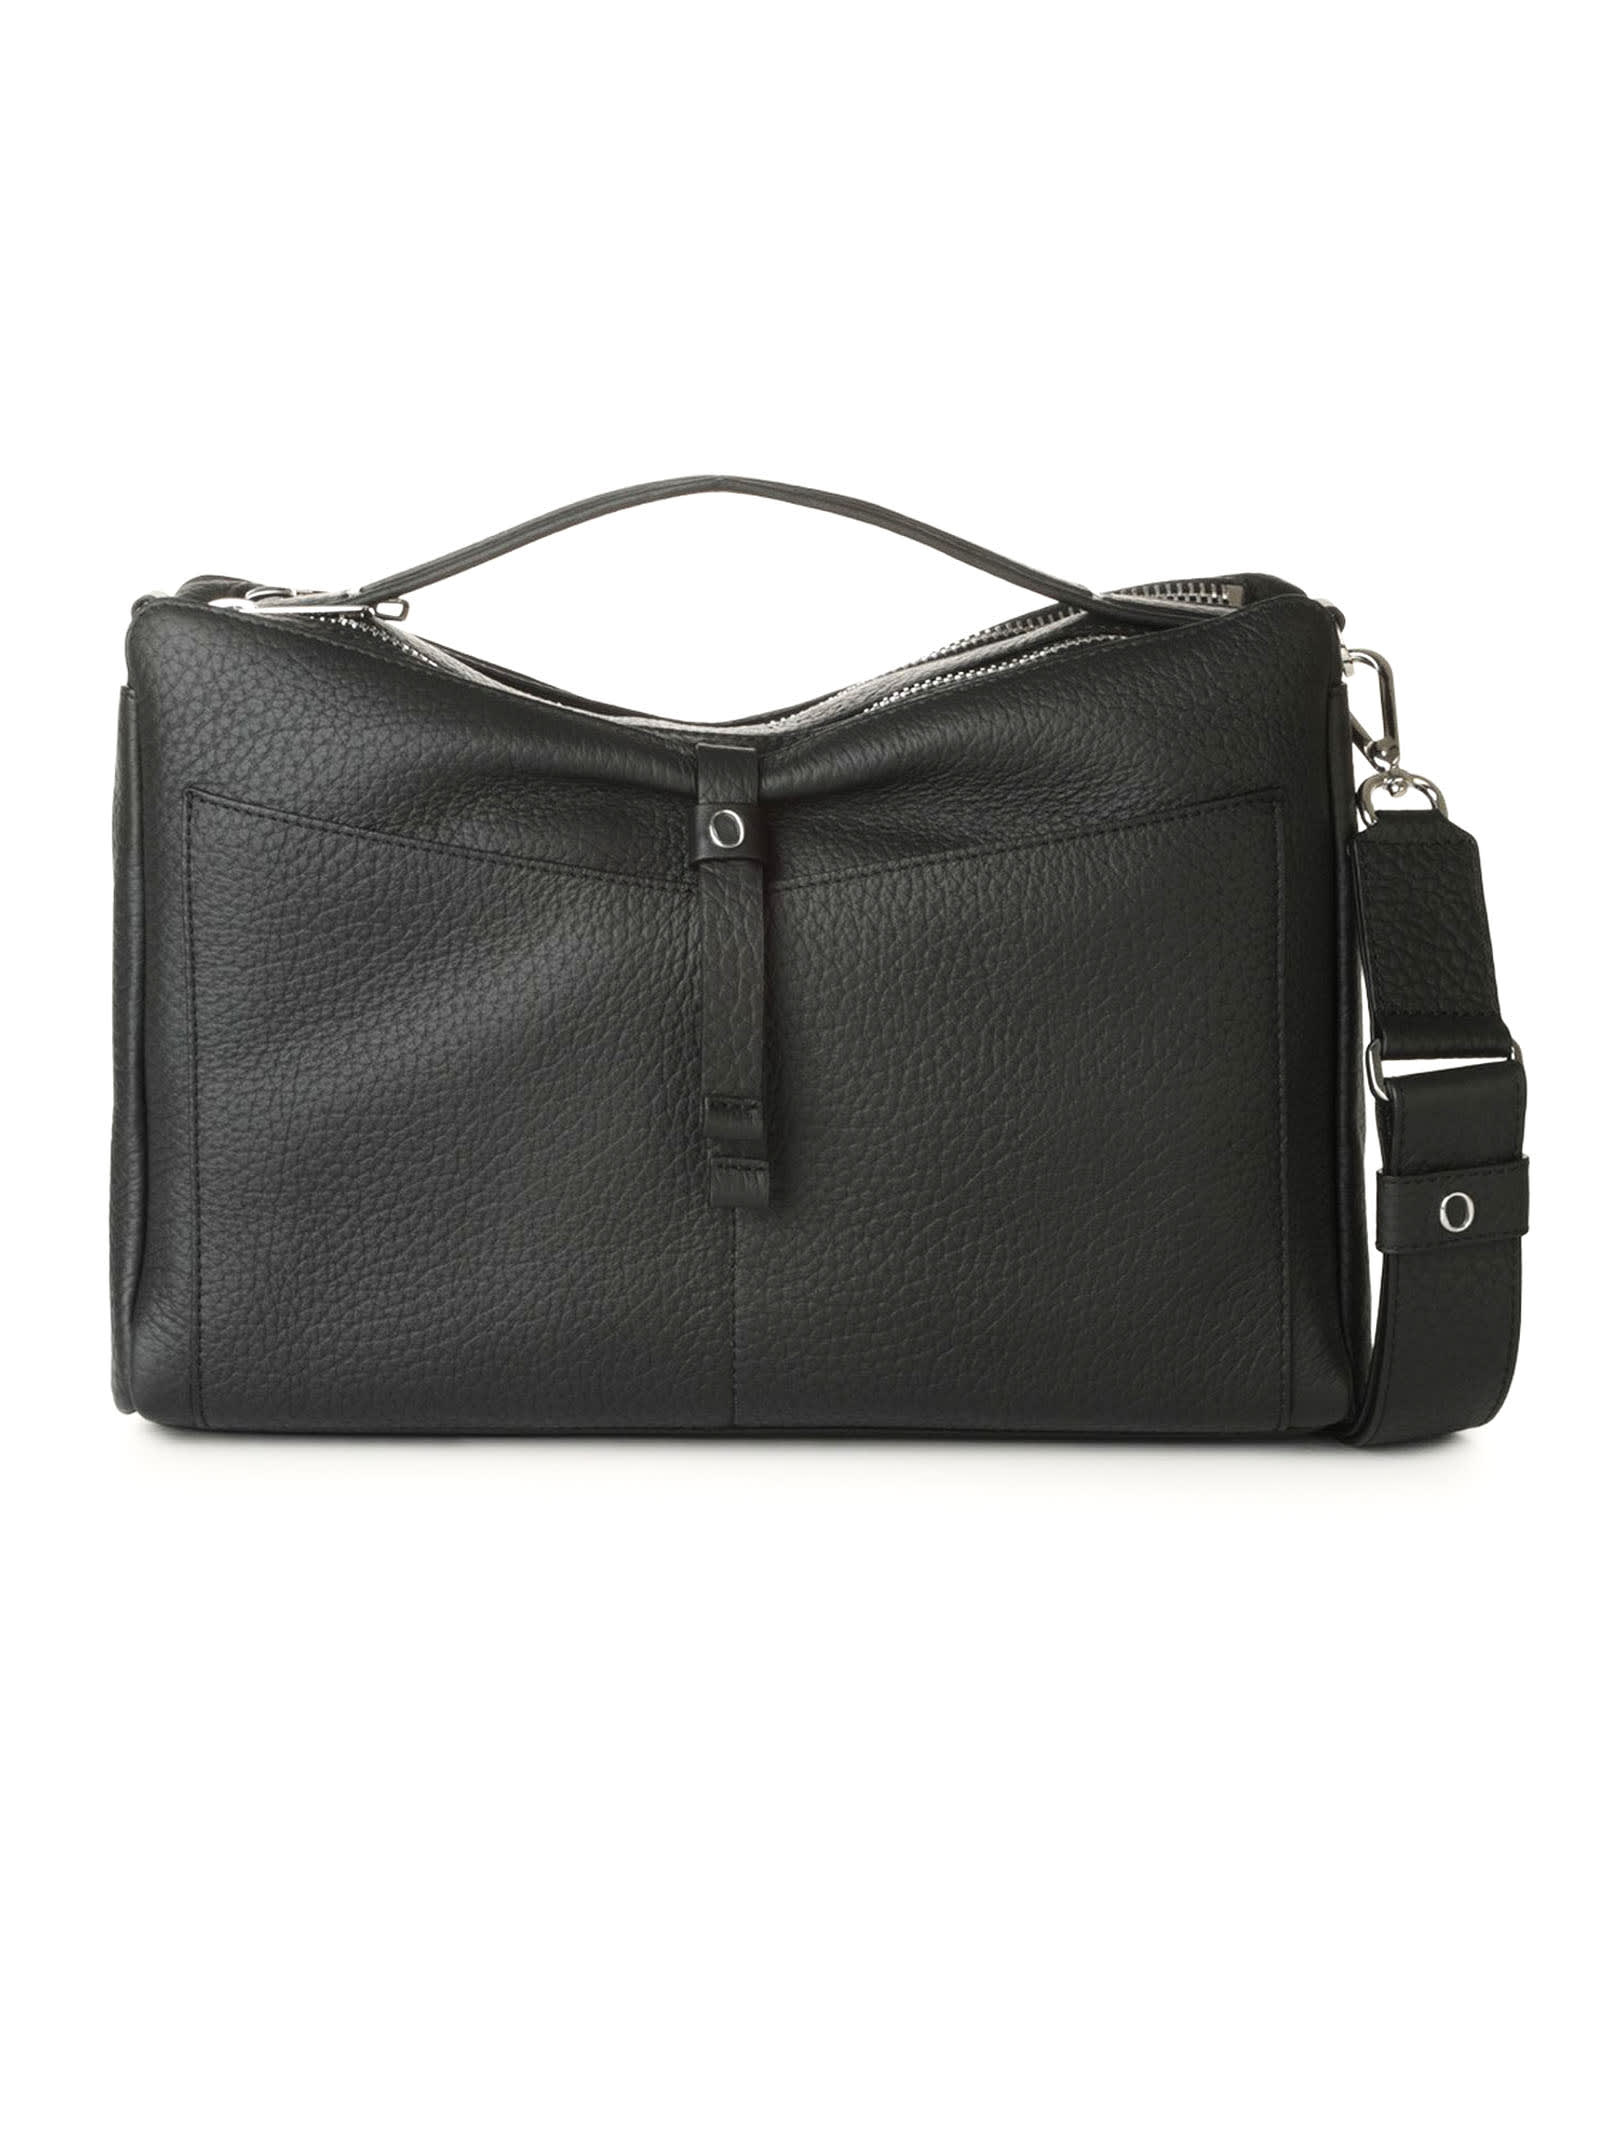 Orciani Boxy Soft Trunk Black Leather Bag With Strap